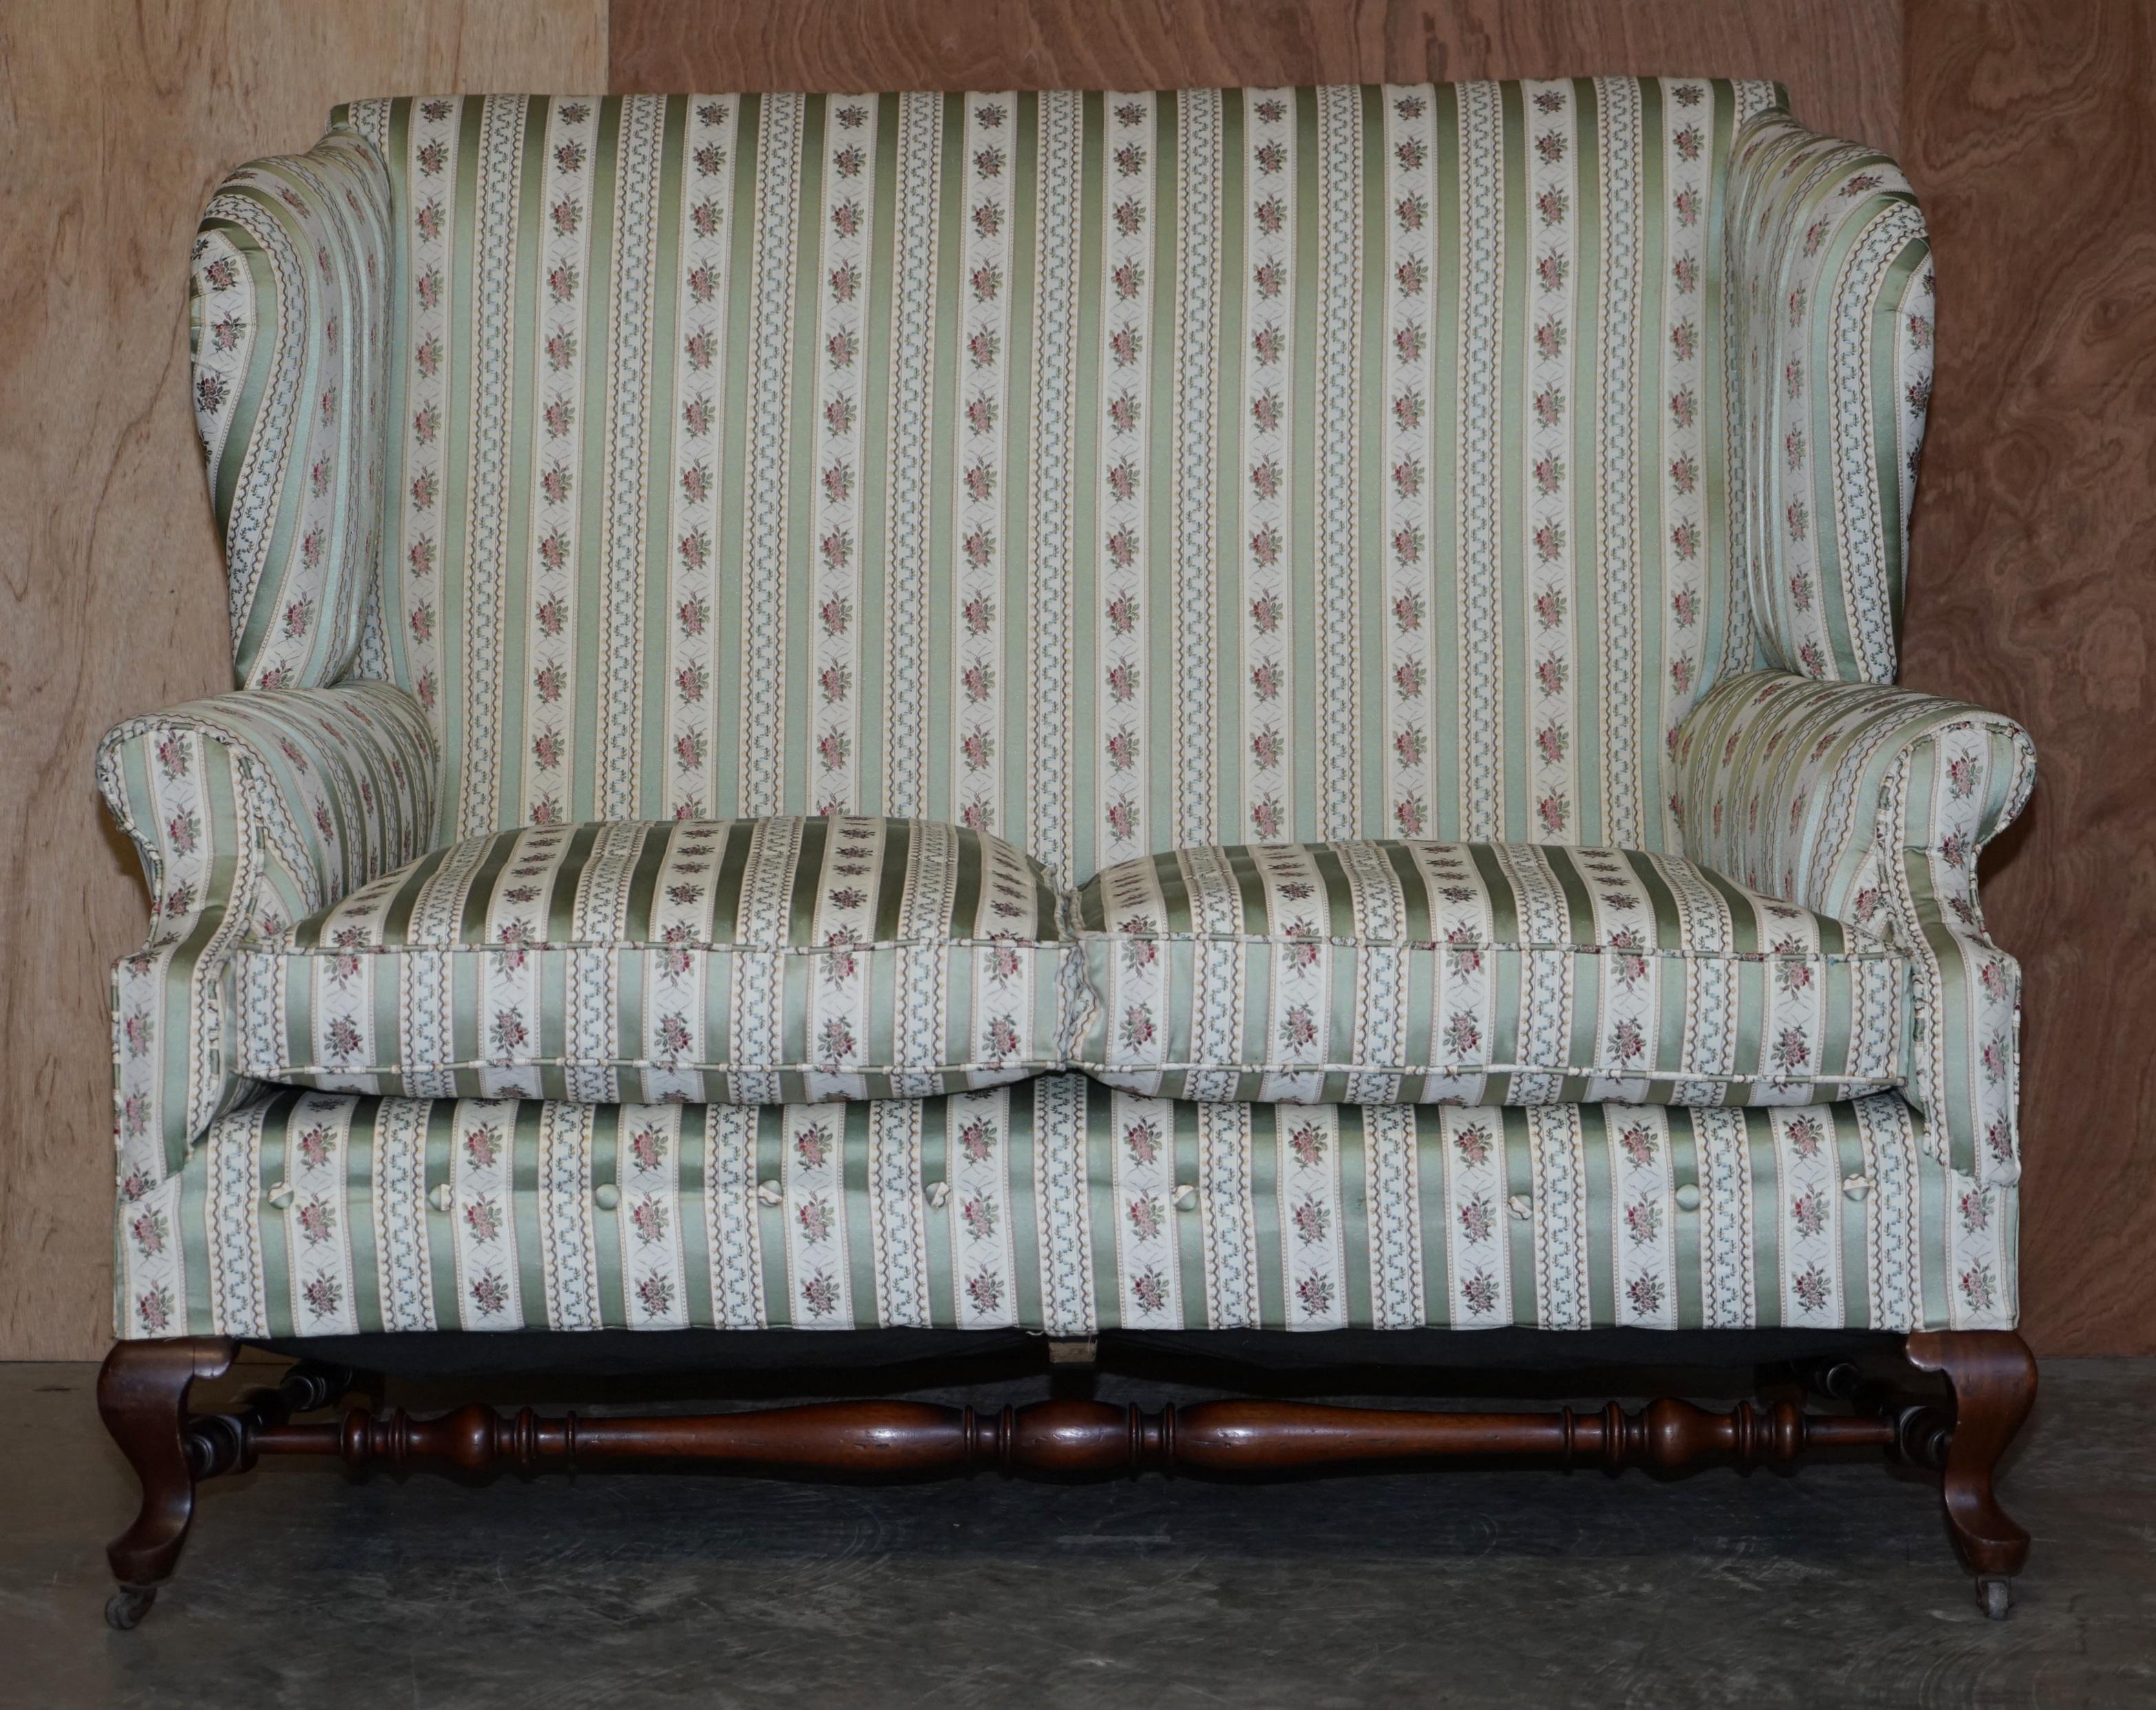 We are delighted to offer for sale this stunning original Victorian Howard & Son’s curved front double wingback sofa full stamped with H&S ticking

A truly stunning piece, in sublime condition, these double wingback sofas almost never come up for